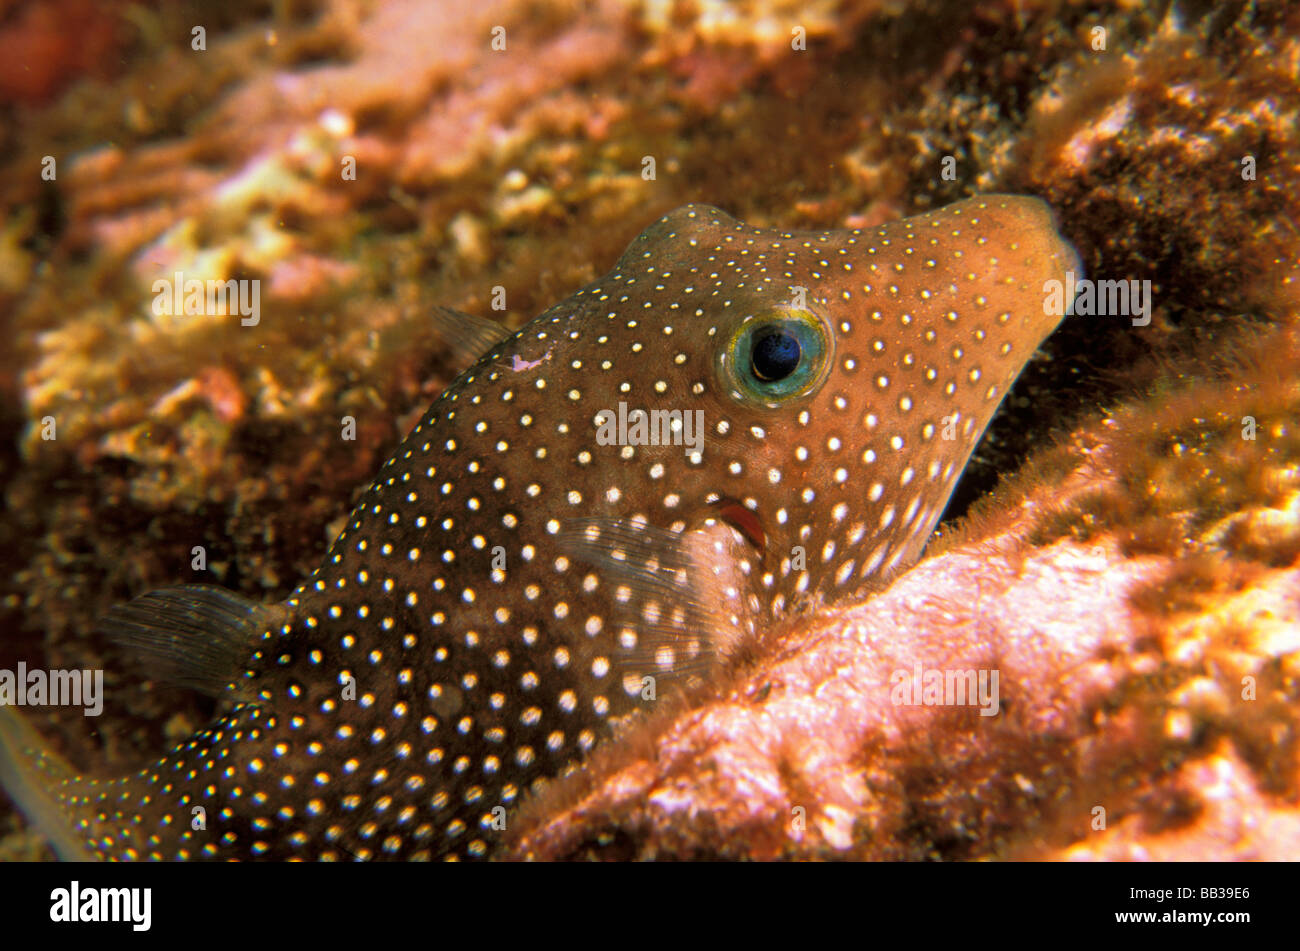 Close up of whitespotted puffer, or canthigaster jactator. Stock Photo